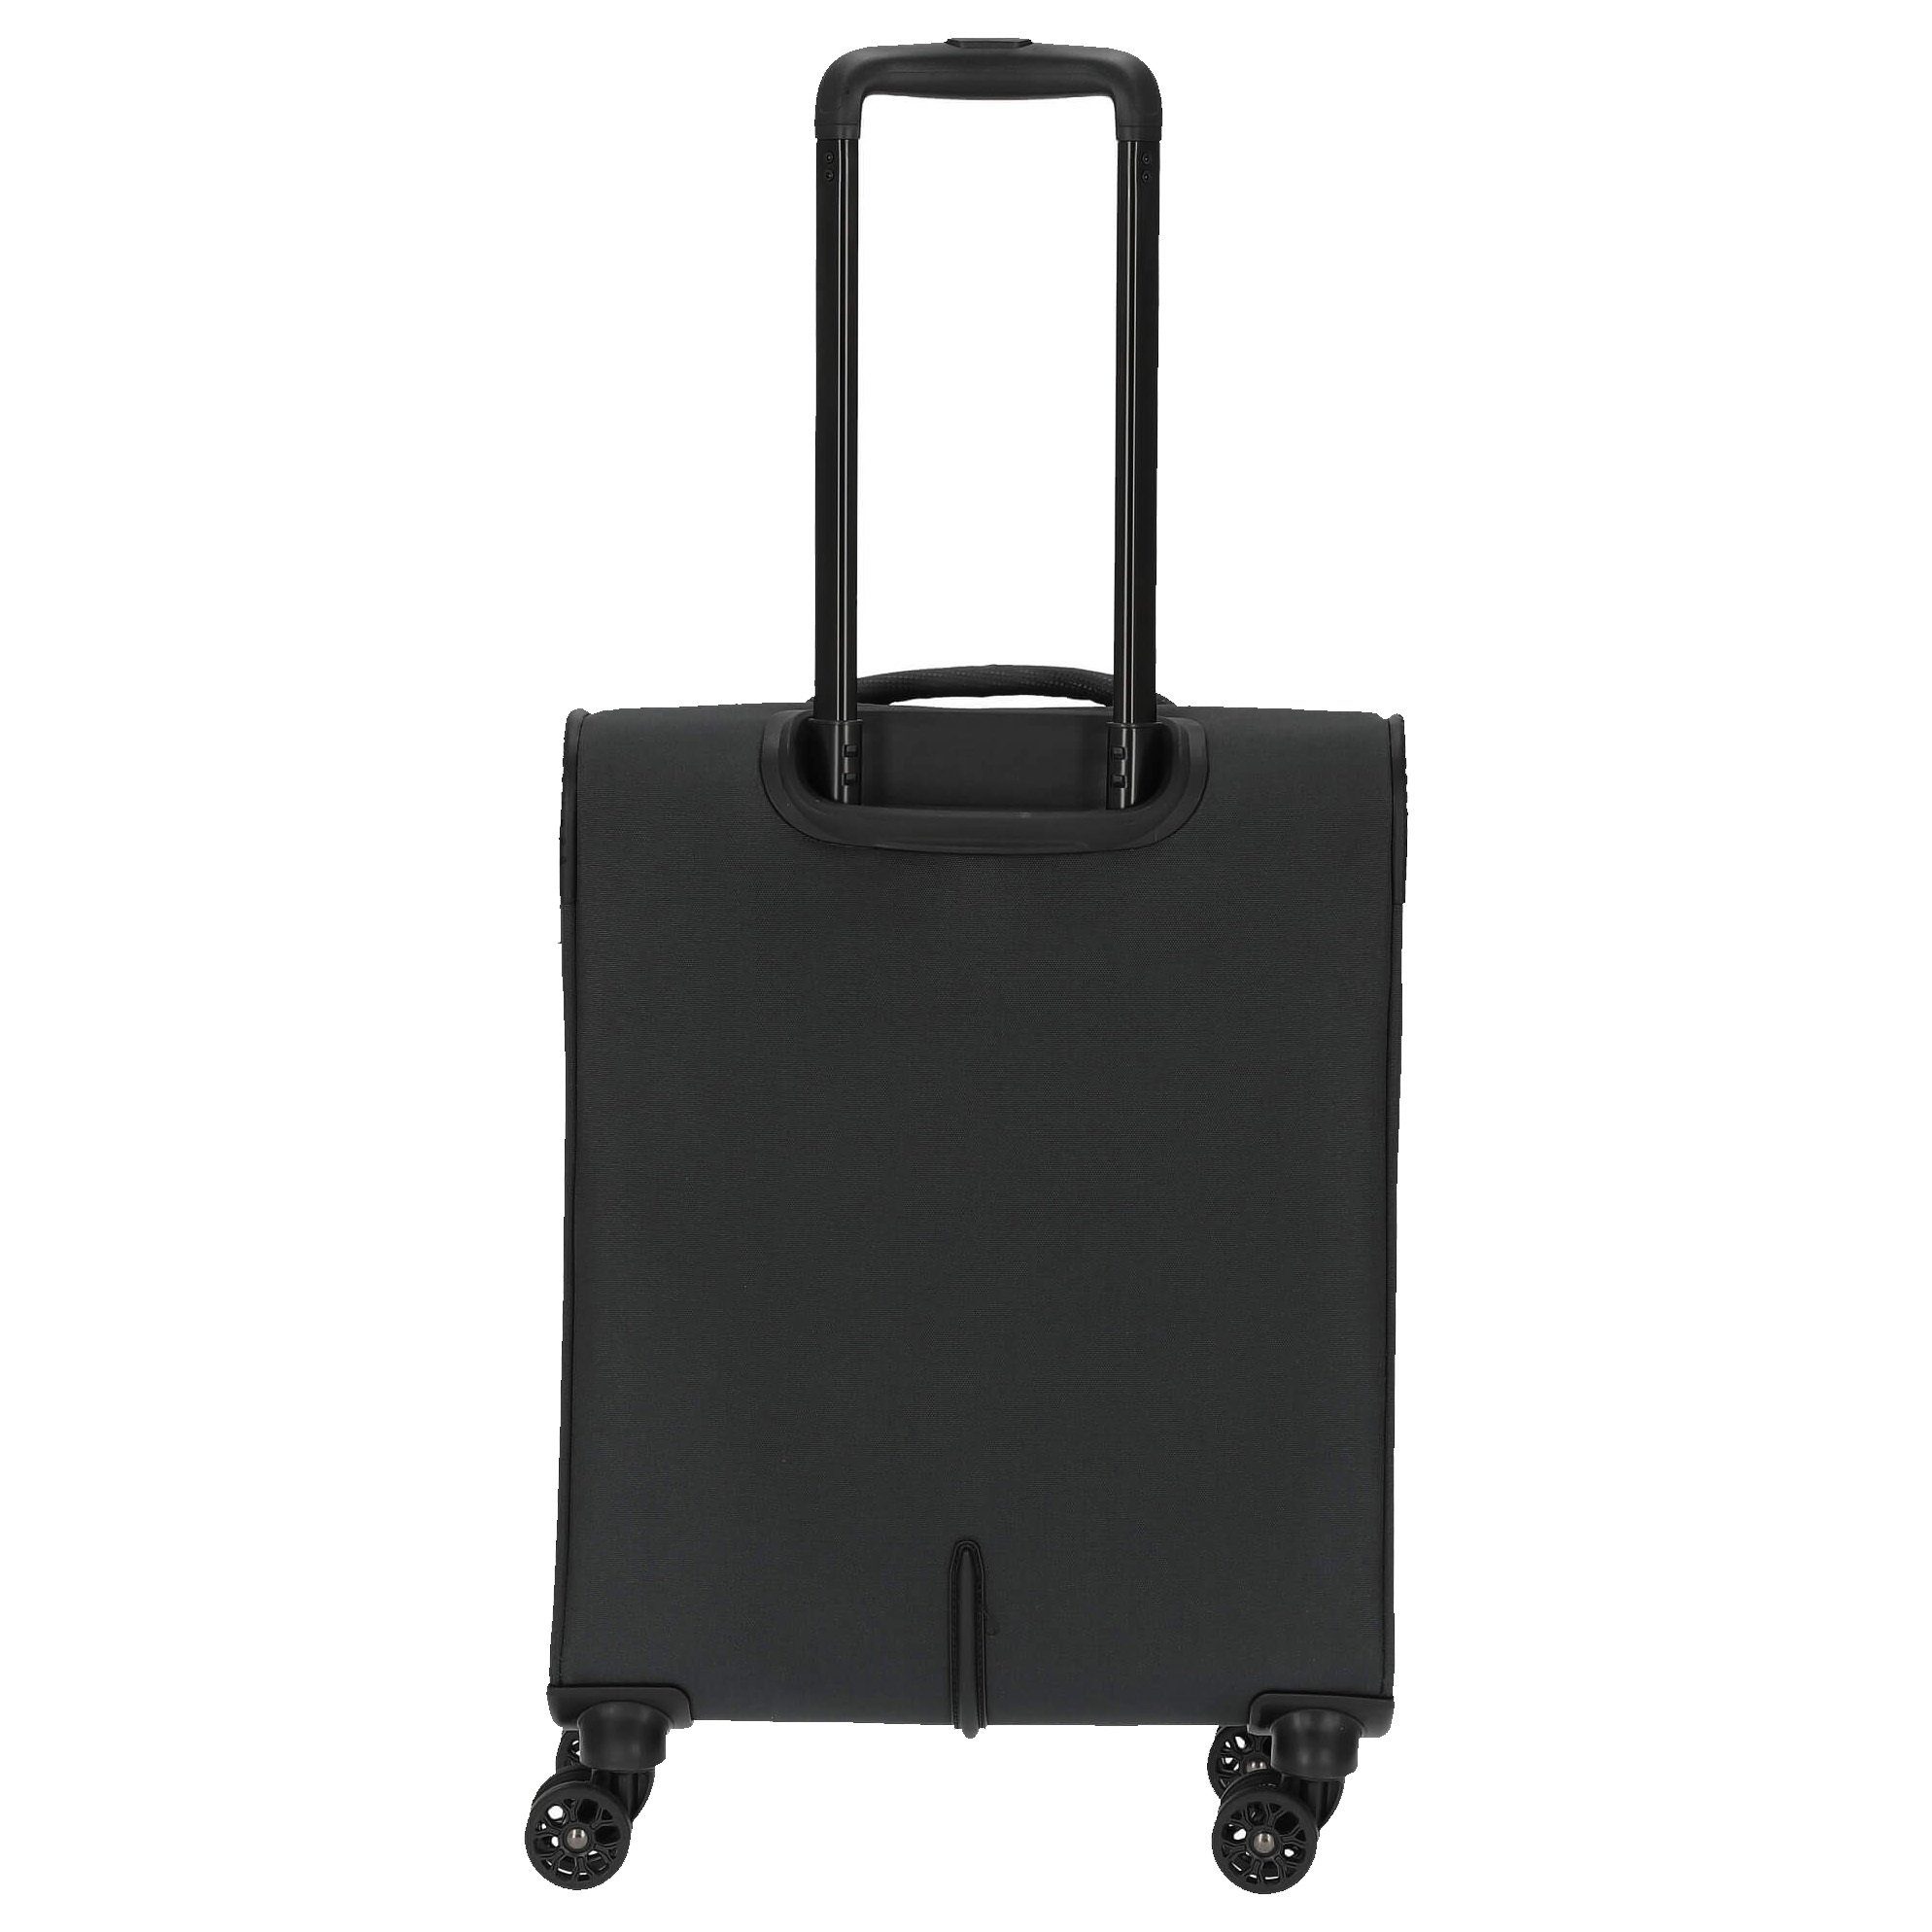 - anthracite Rollen 4 Trolley 4-Rollen-Trolley Strong 55 cm, Stratic S